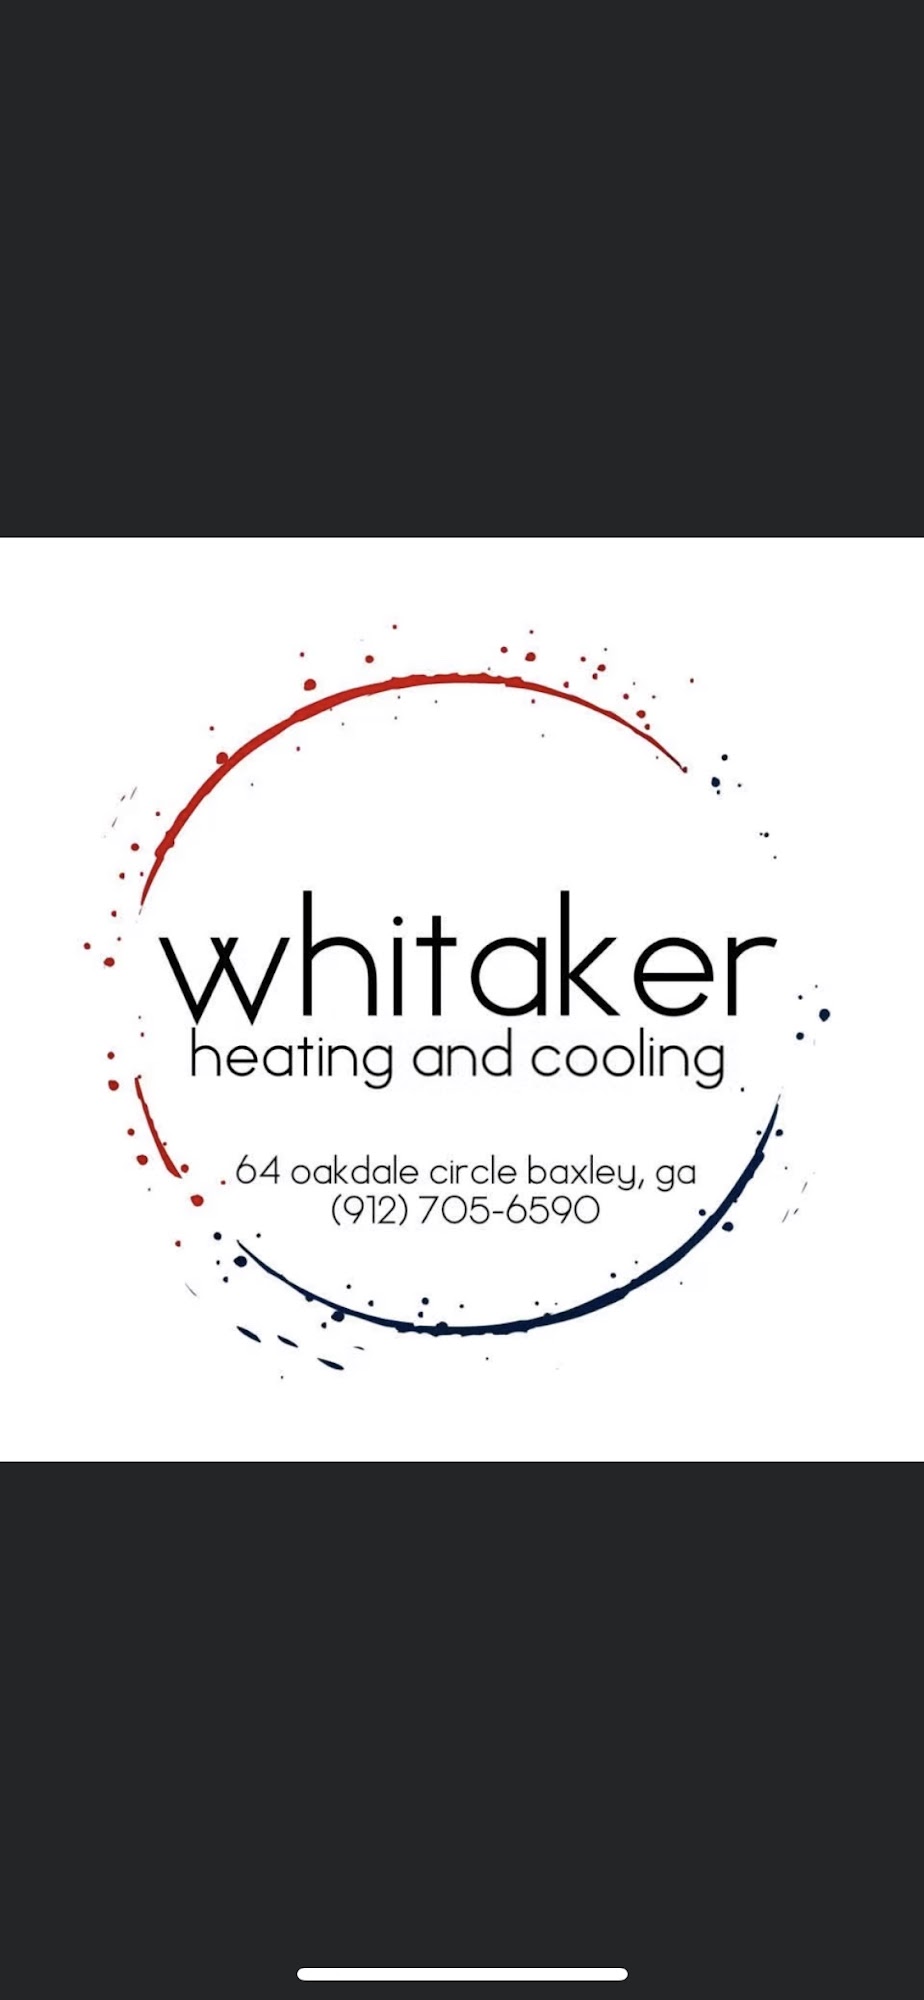 Whitaker Heating and Cooling 64 Oakdale Cir, Baxley Georgia 31513